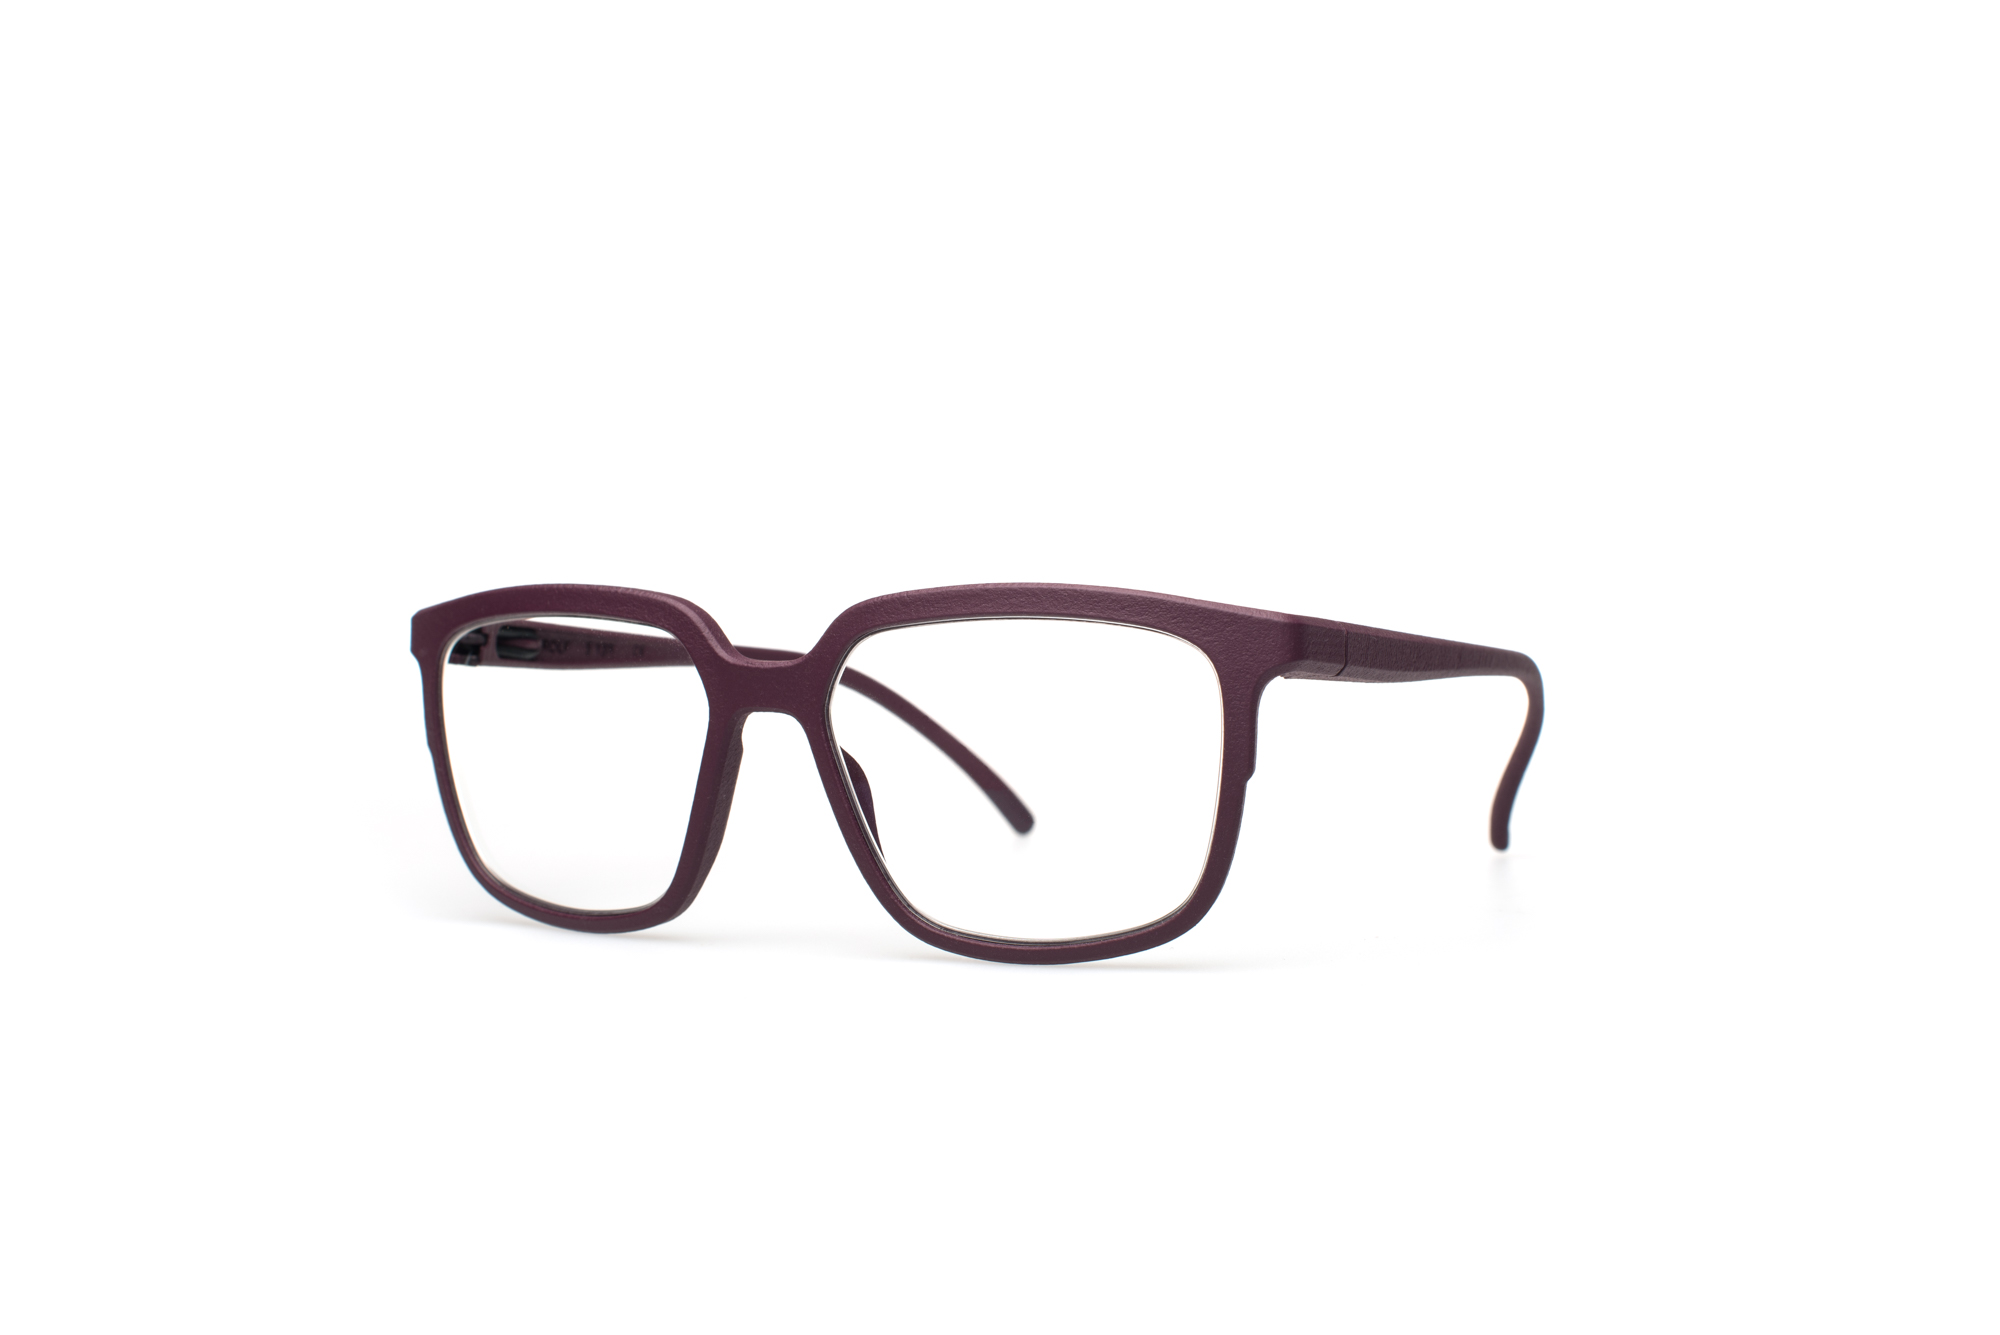 rolf eyewear substance plus collection BACK m04purple persp rolf.